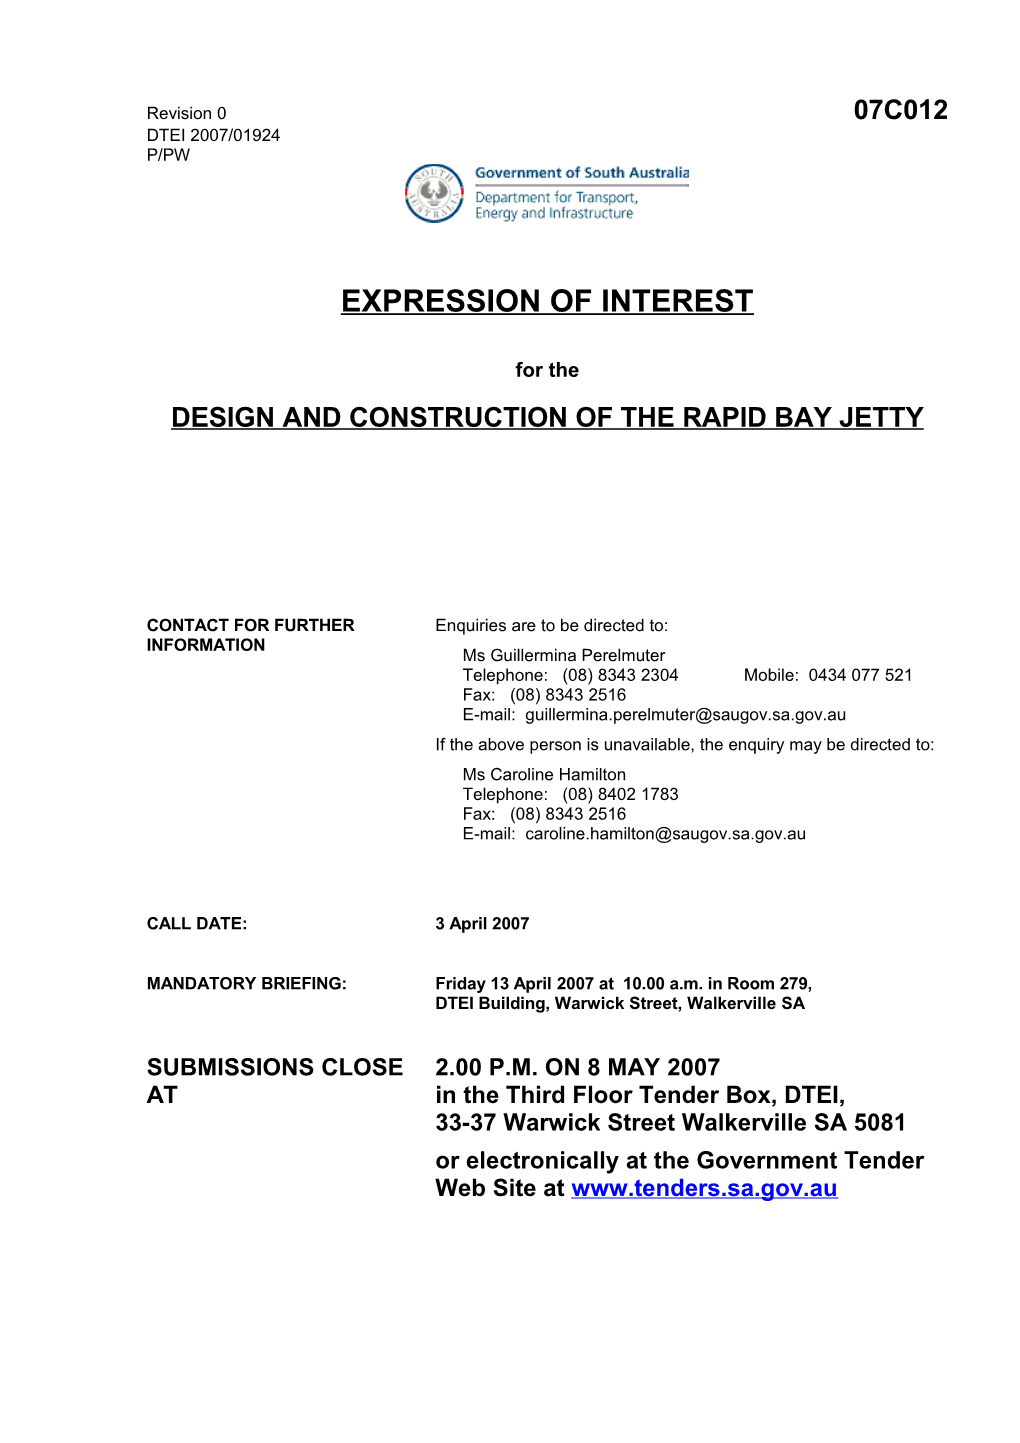 Design and Construction of the Rapid Bay Jetty